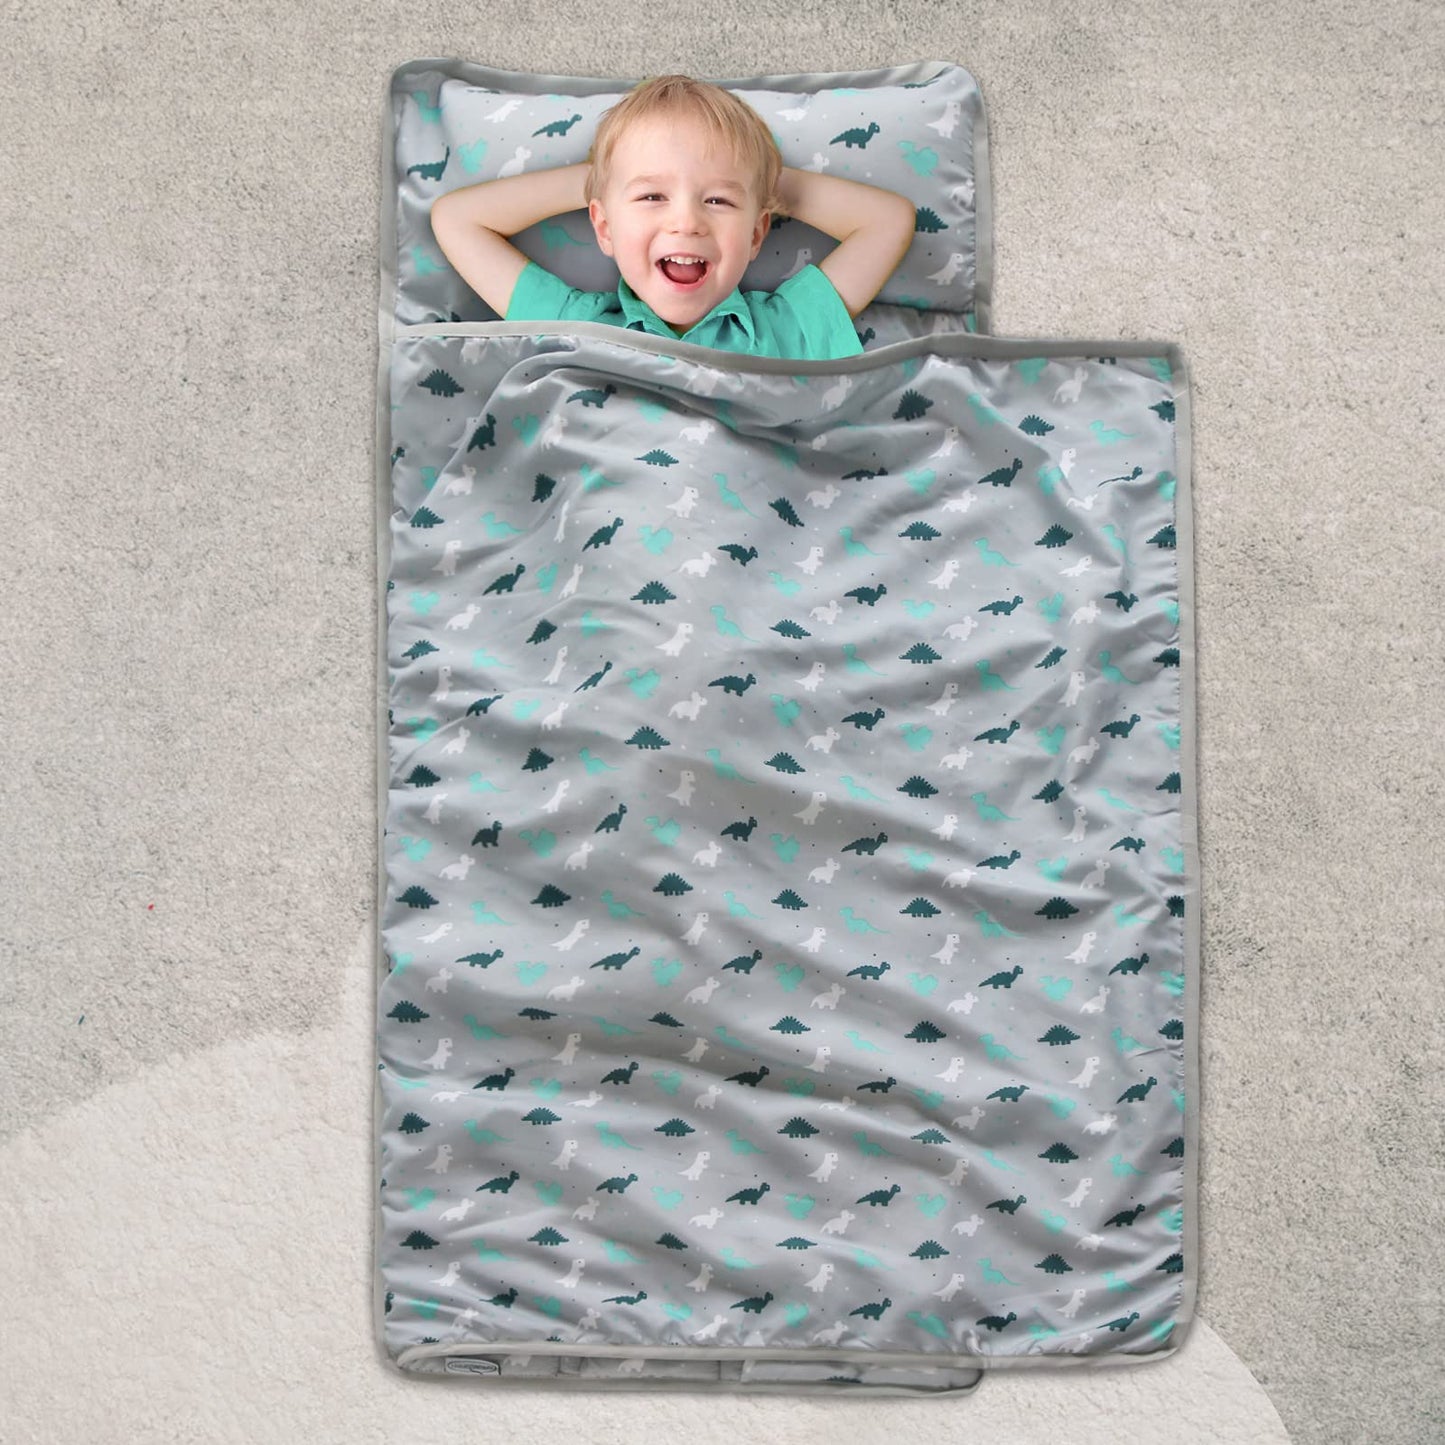 Toddler Nap Mat with Pillow and Blanket 50" x 21" x 1.5", Nap Mat for Boys Girls Super Soft and Cozy, Kids Sleeping Bag for Preschool, Daycare, Toddler Sleeping Bag, Grey Dinosaur